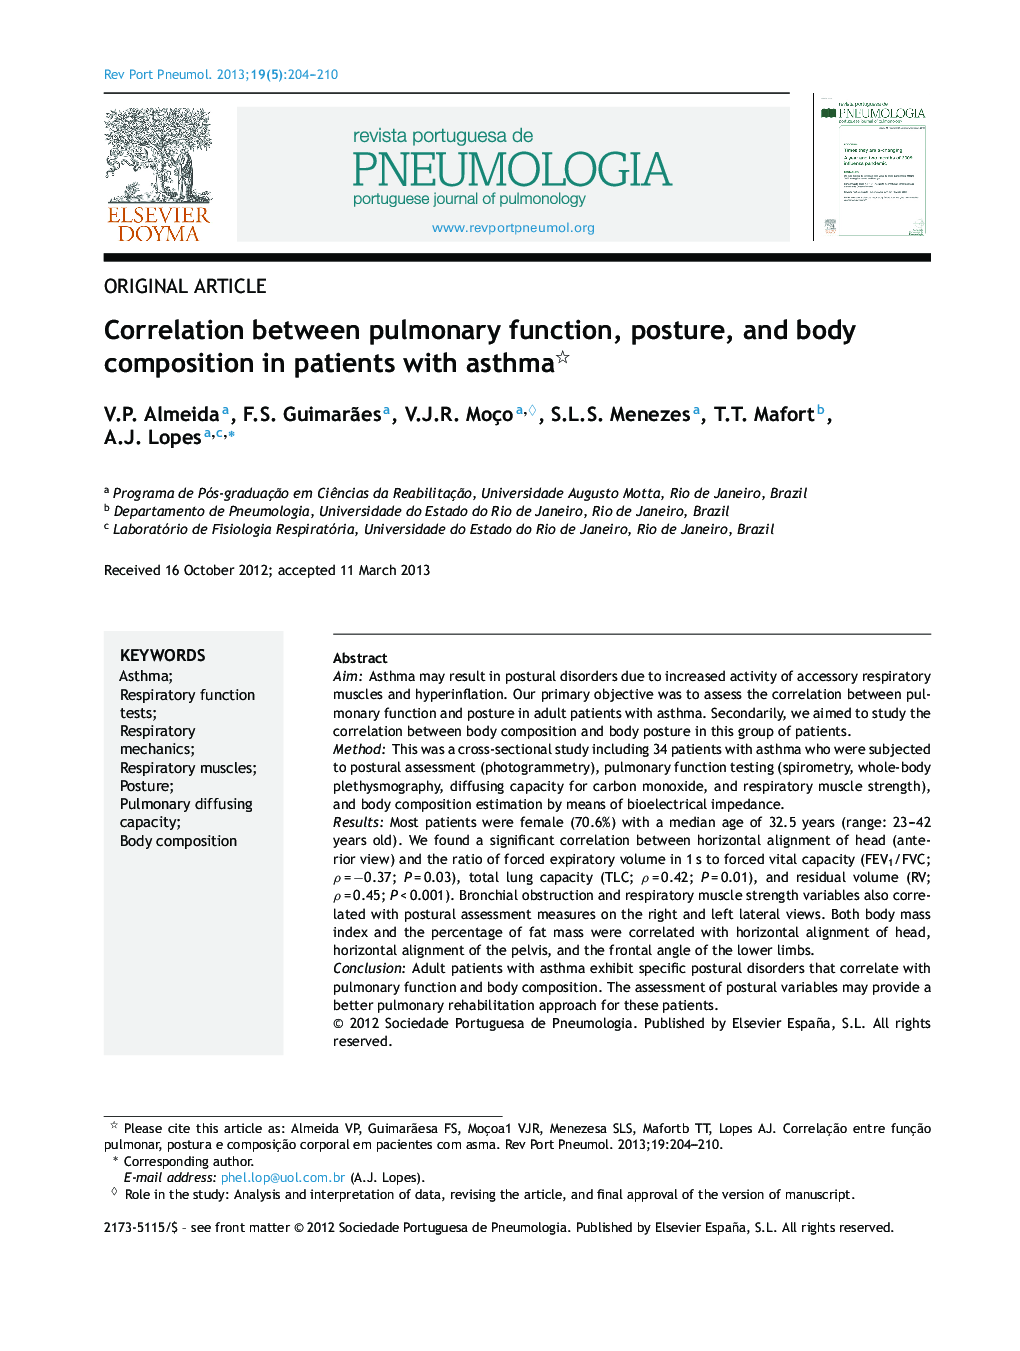 Correlation between pulmonary function, posture, and body composition in patients with asthma